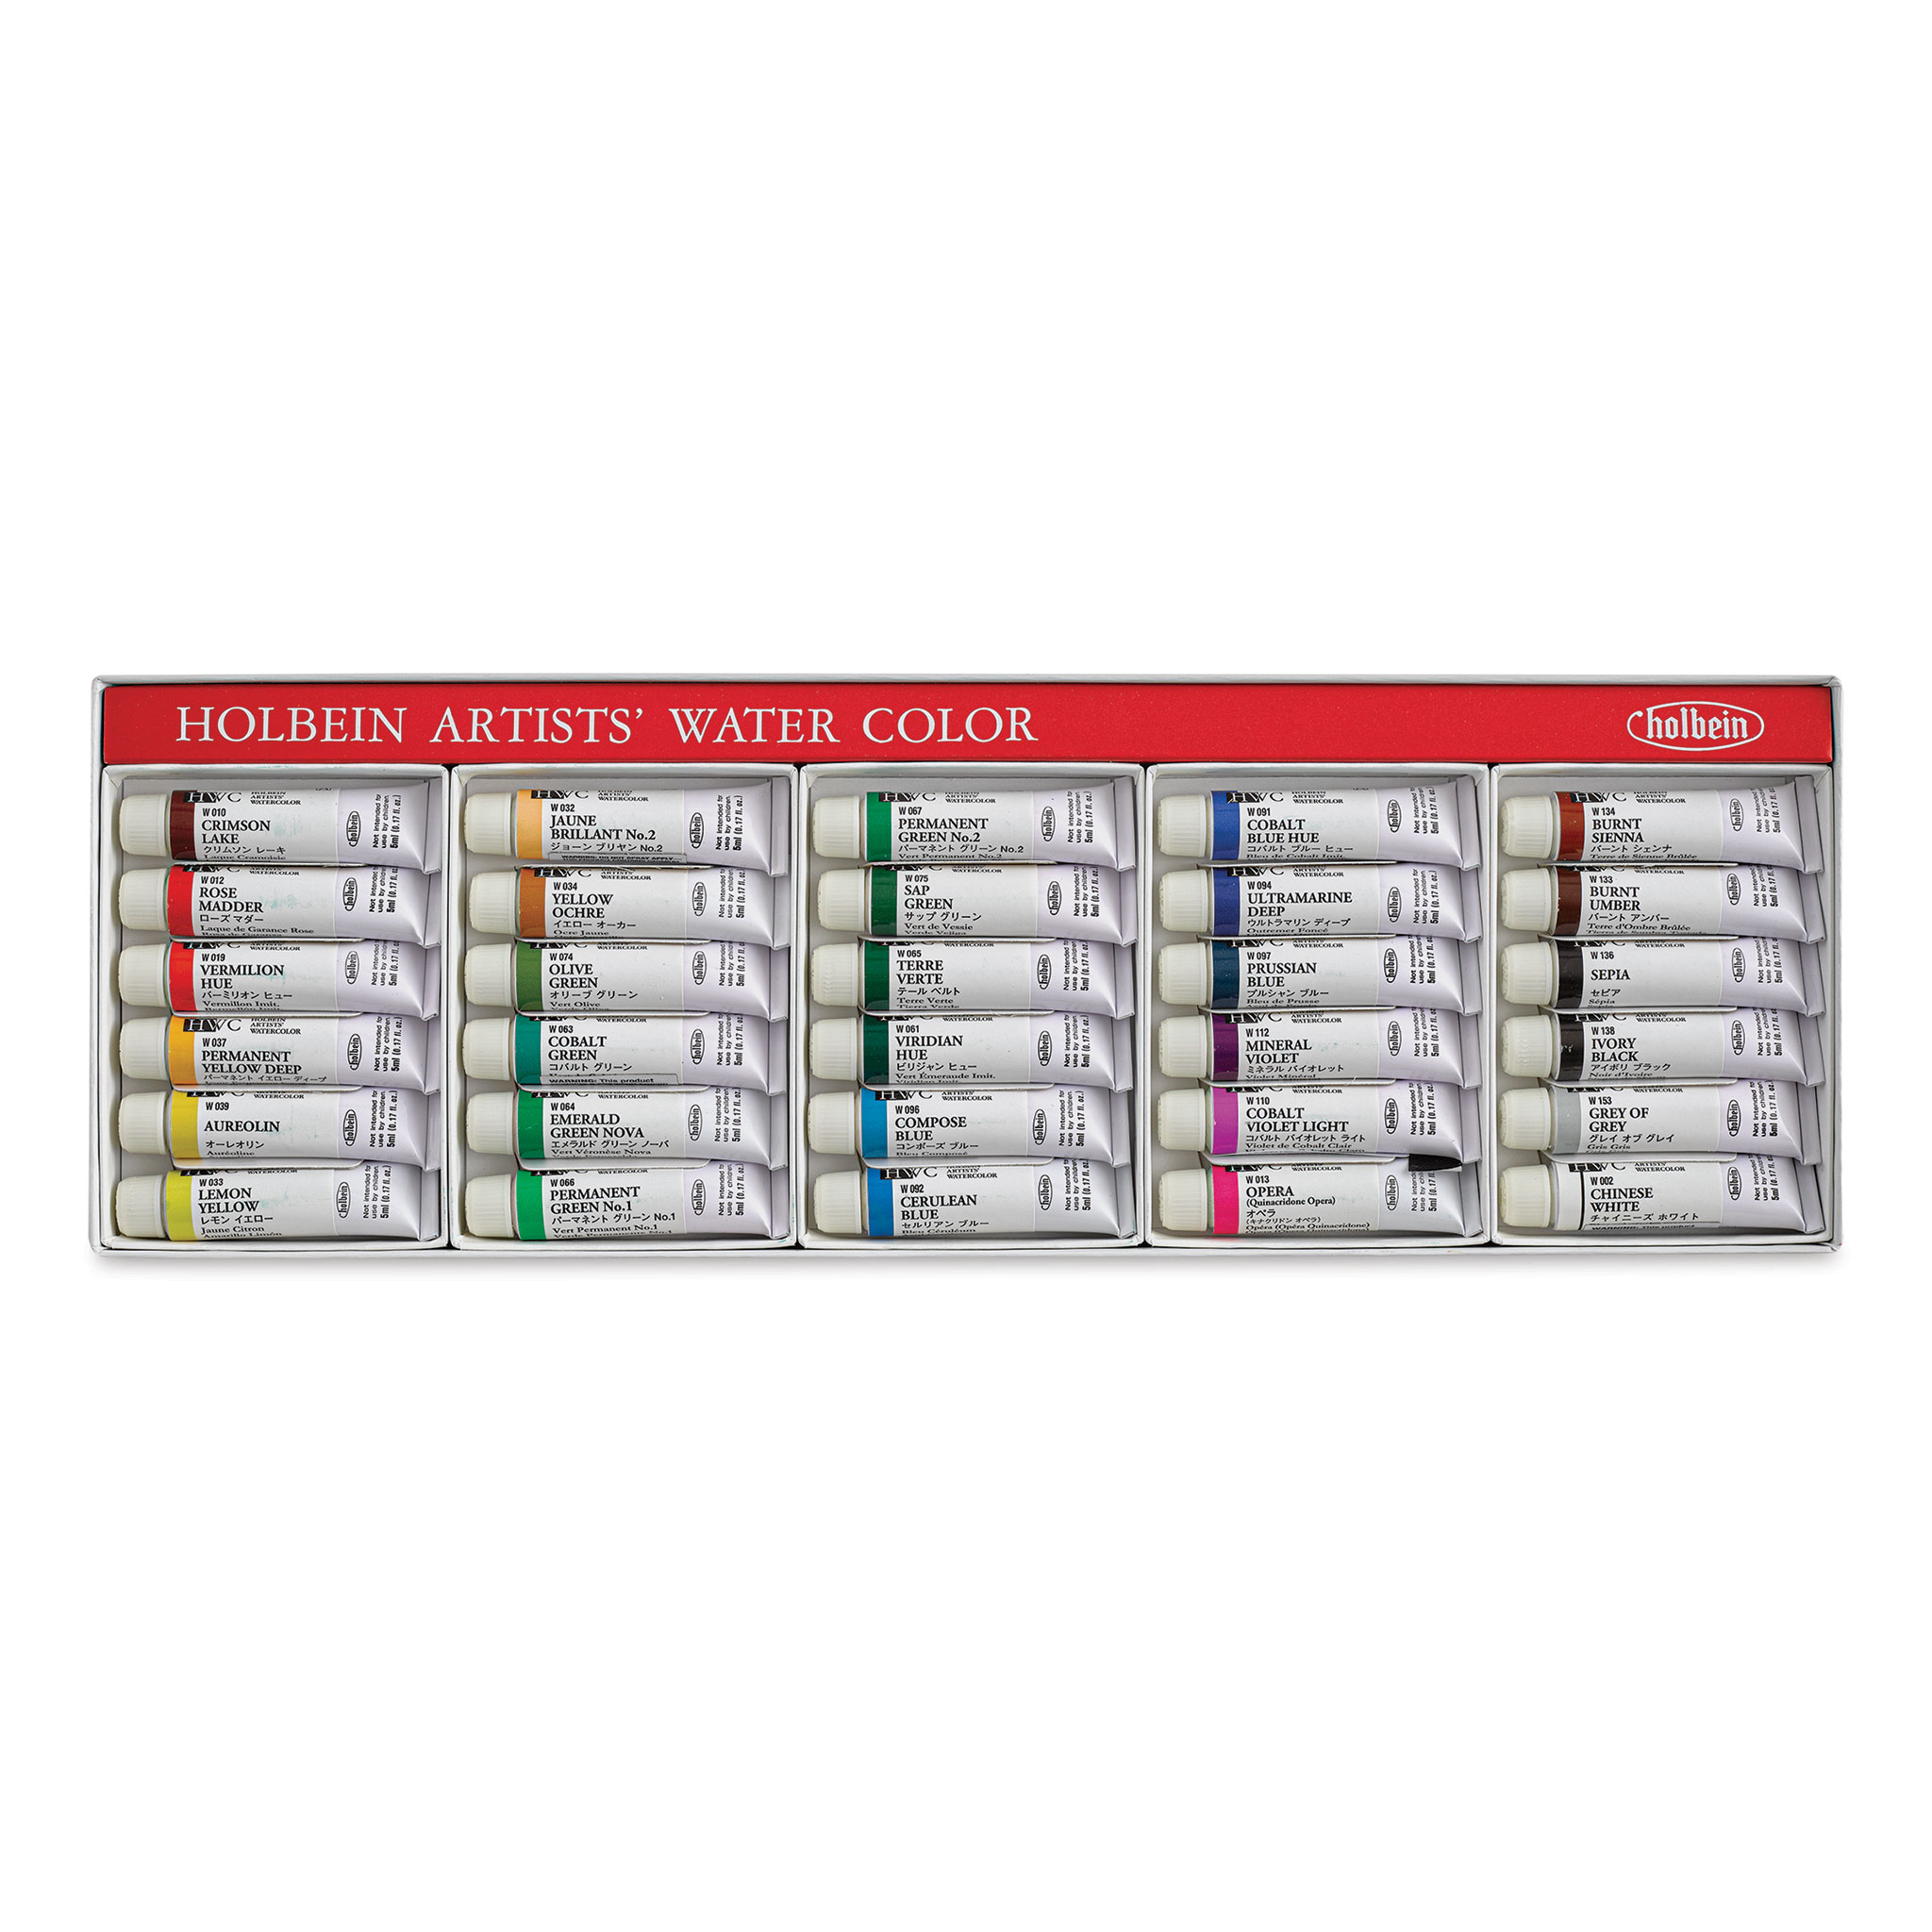  Holbein Artists' Watercolors - Assorted Colors, Set of